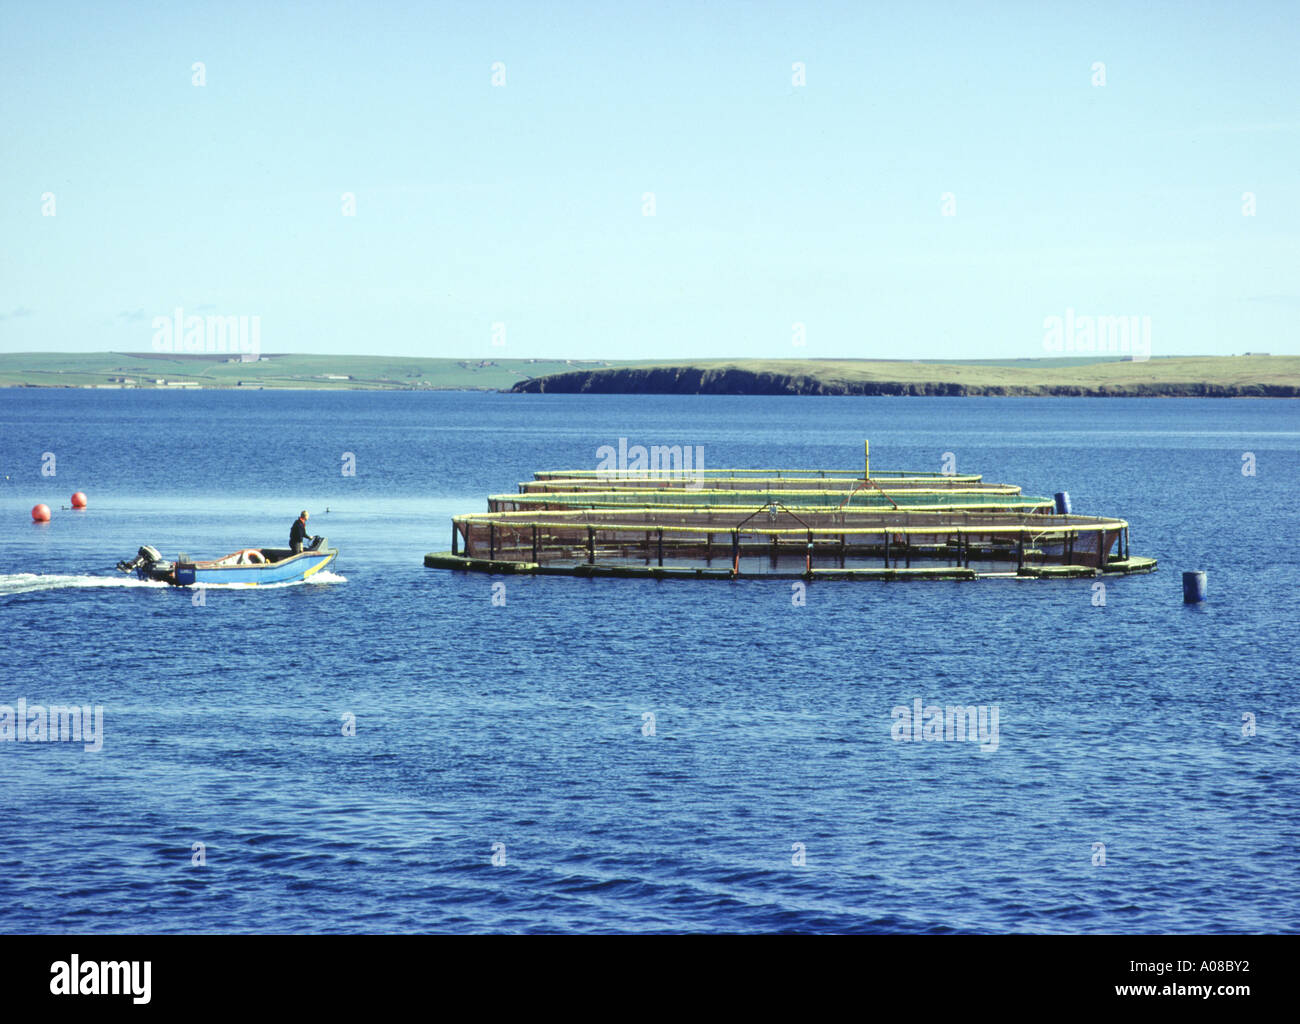 dh Norquay Fish Farm ORKNEY SALMON ORKNEY Boat arriving at fish cages farmer Stock Photo